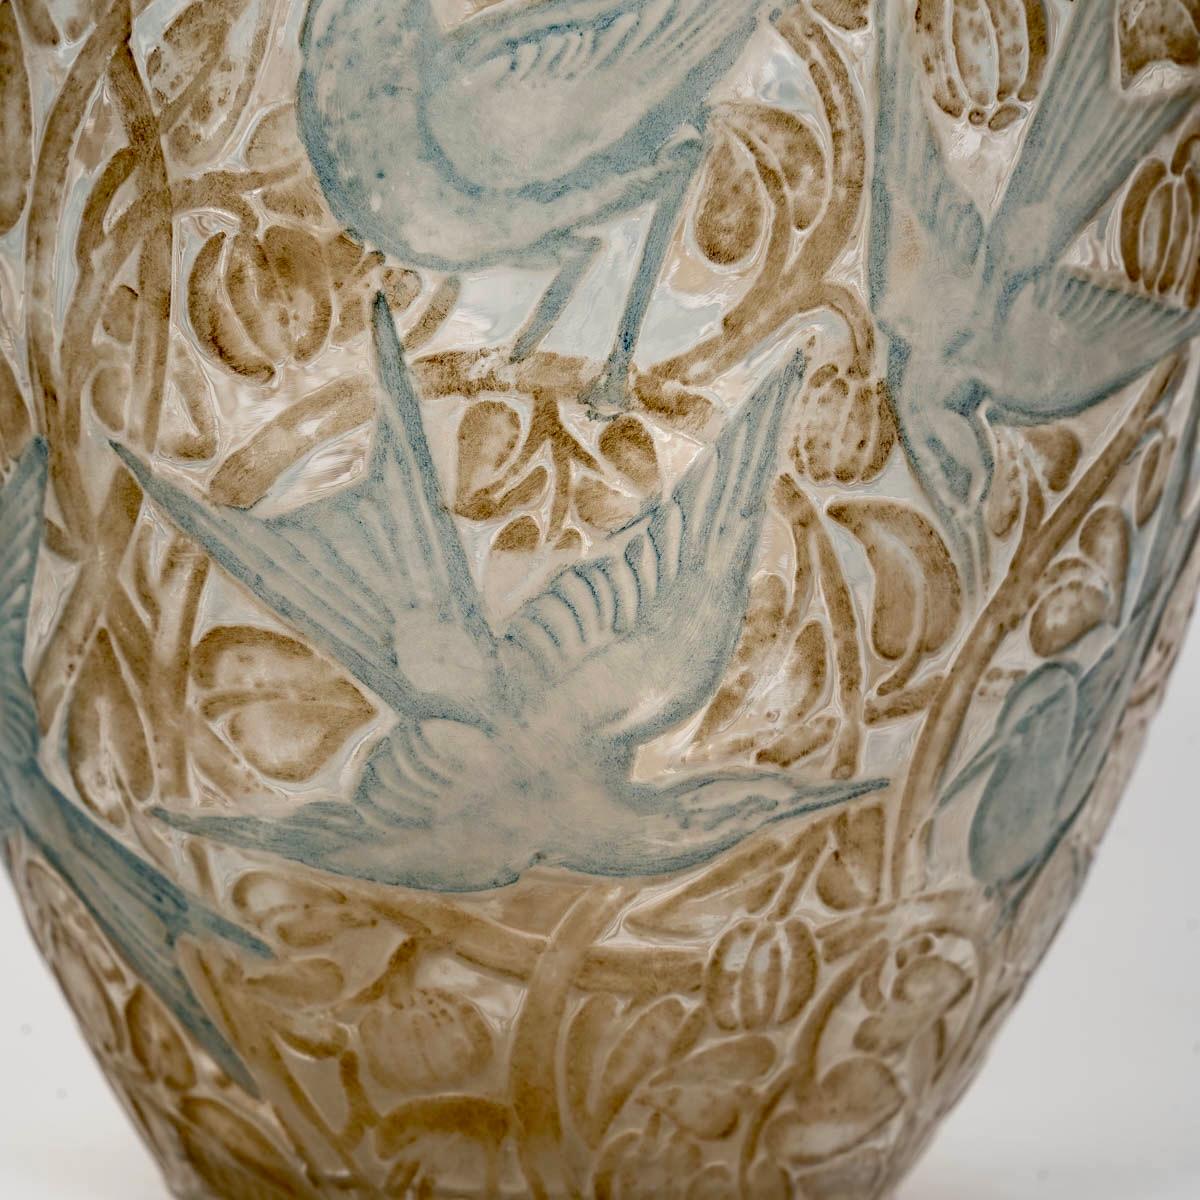 French 1923 Rene Lalique - Vase Martin Pecheurs Frosted Glass with Green & Sepia Patina For Sale